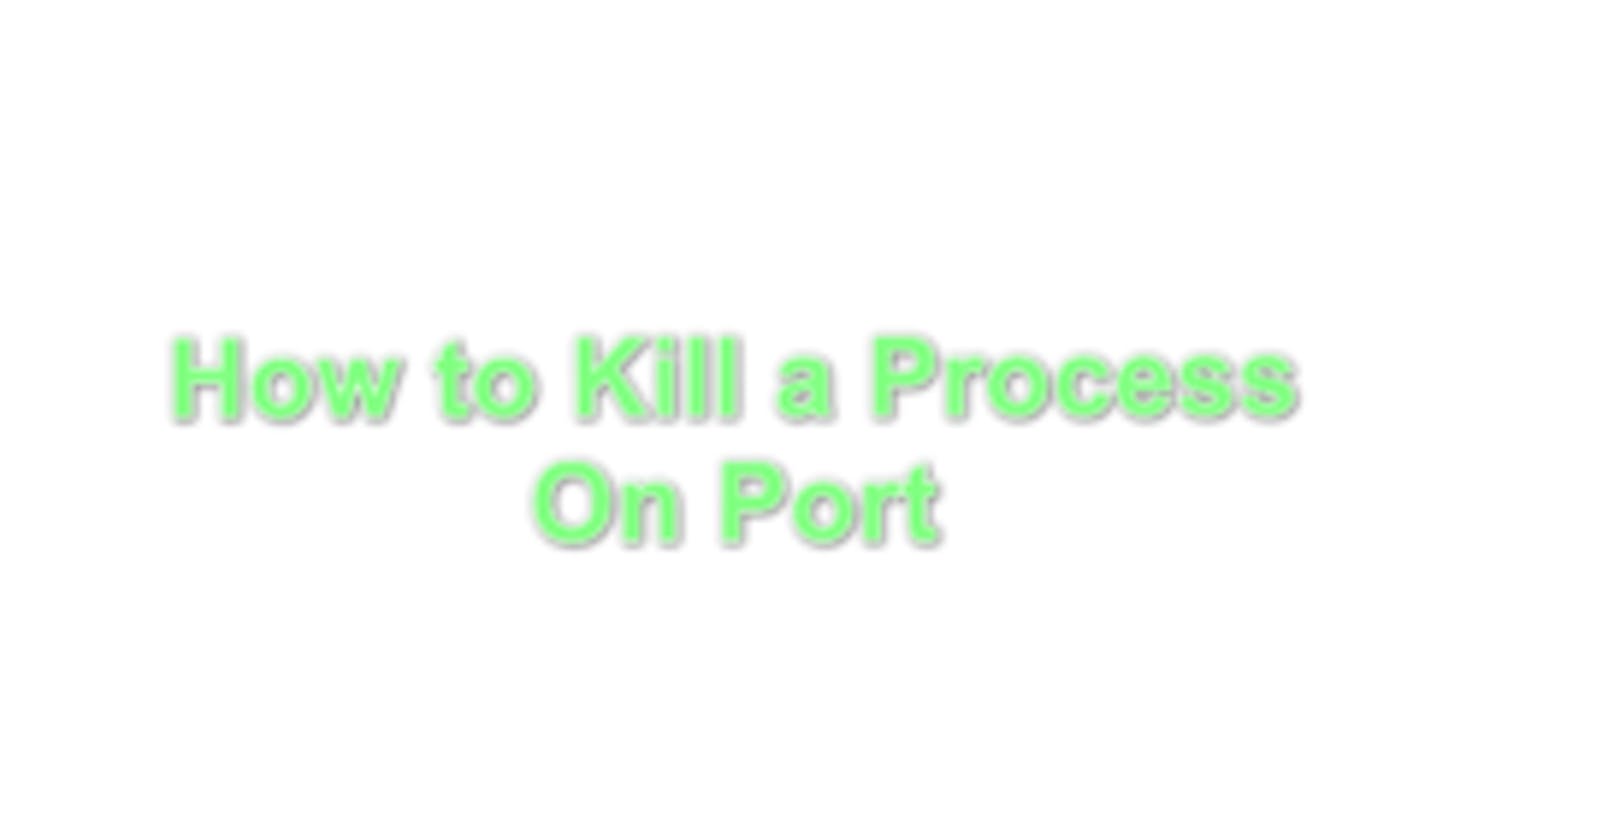 How to terminate a process on a port using the command line